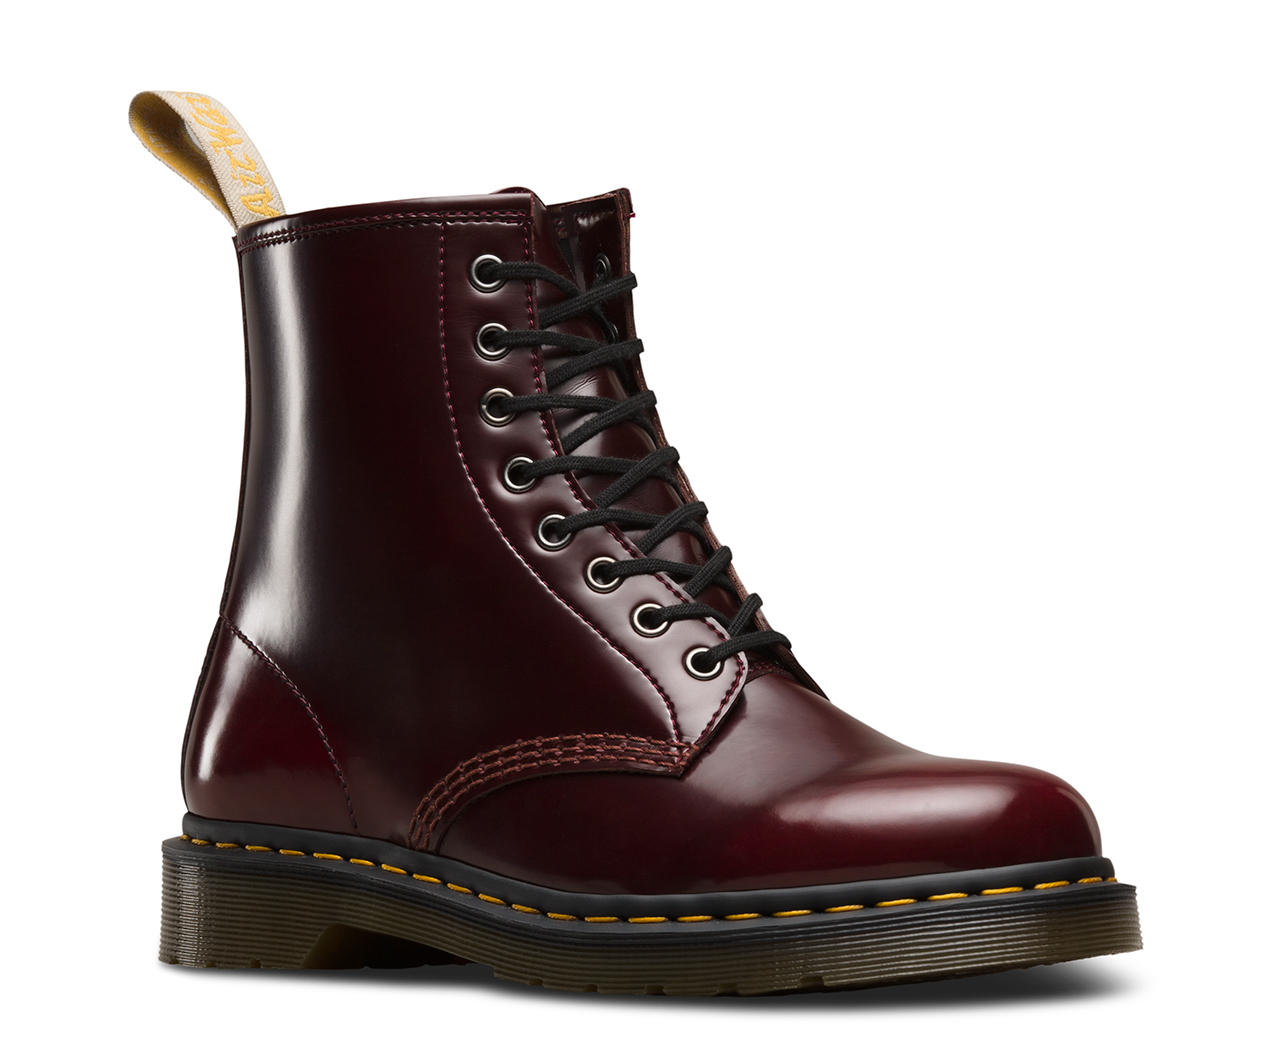 dr martens 1460 cherry red